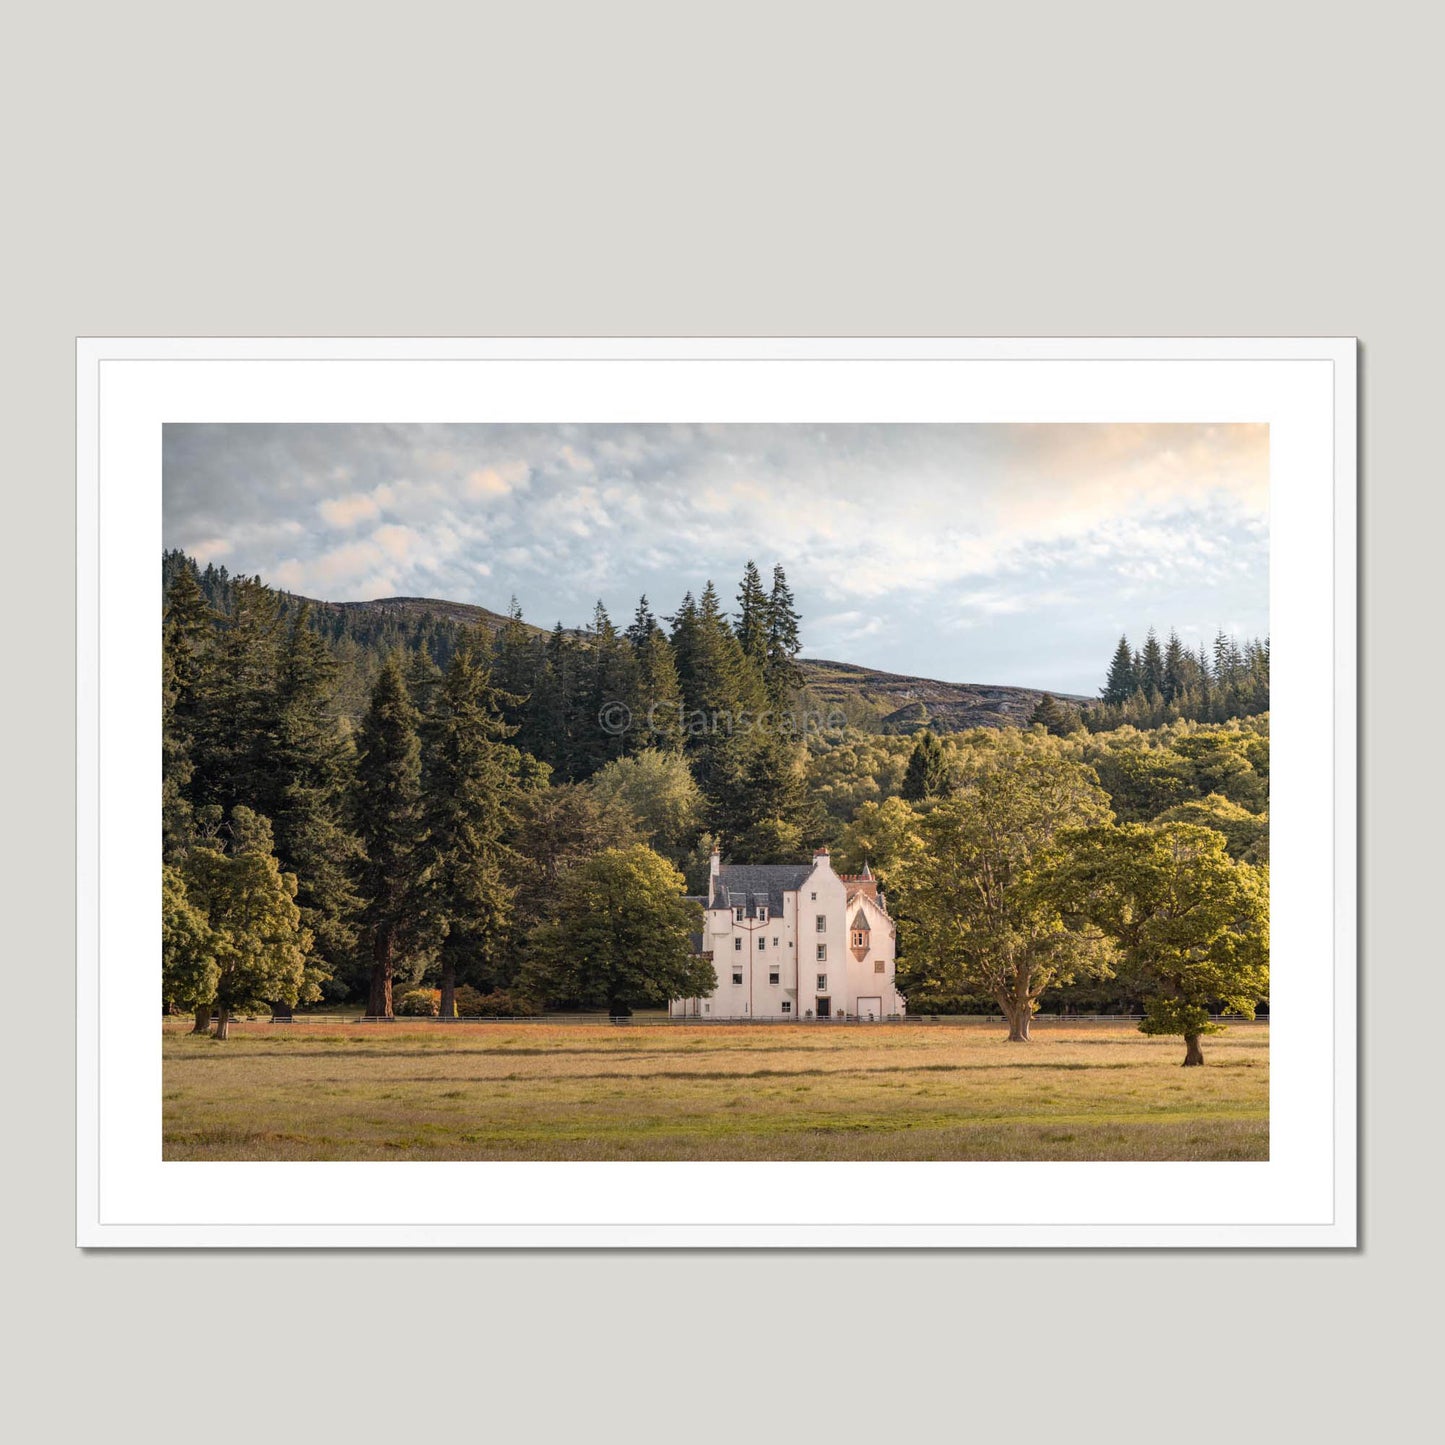 Clan Chisholm - Erchless Castle - Framed & Mounted Photo Print 40"x28" White